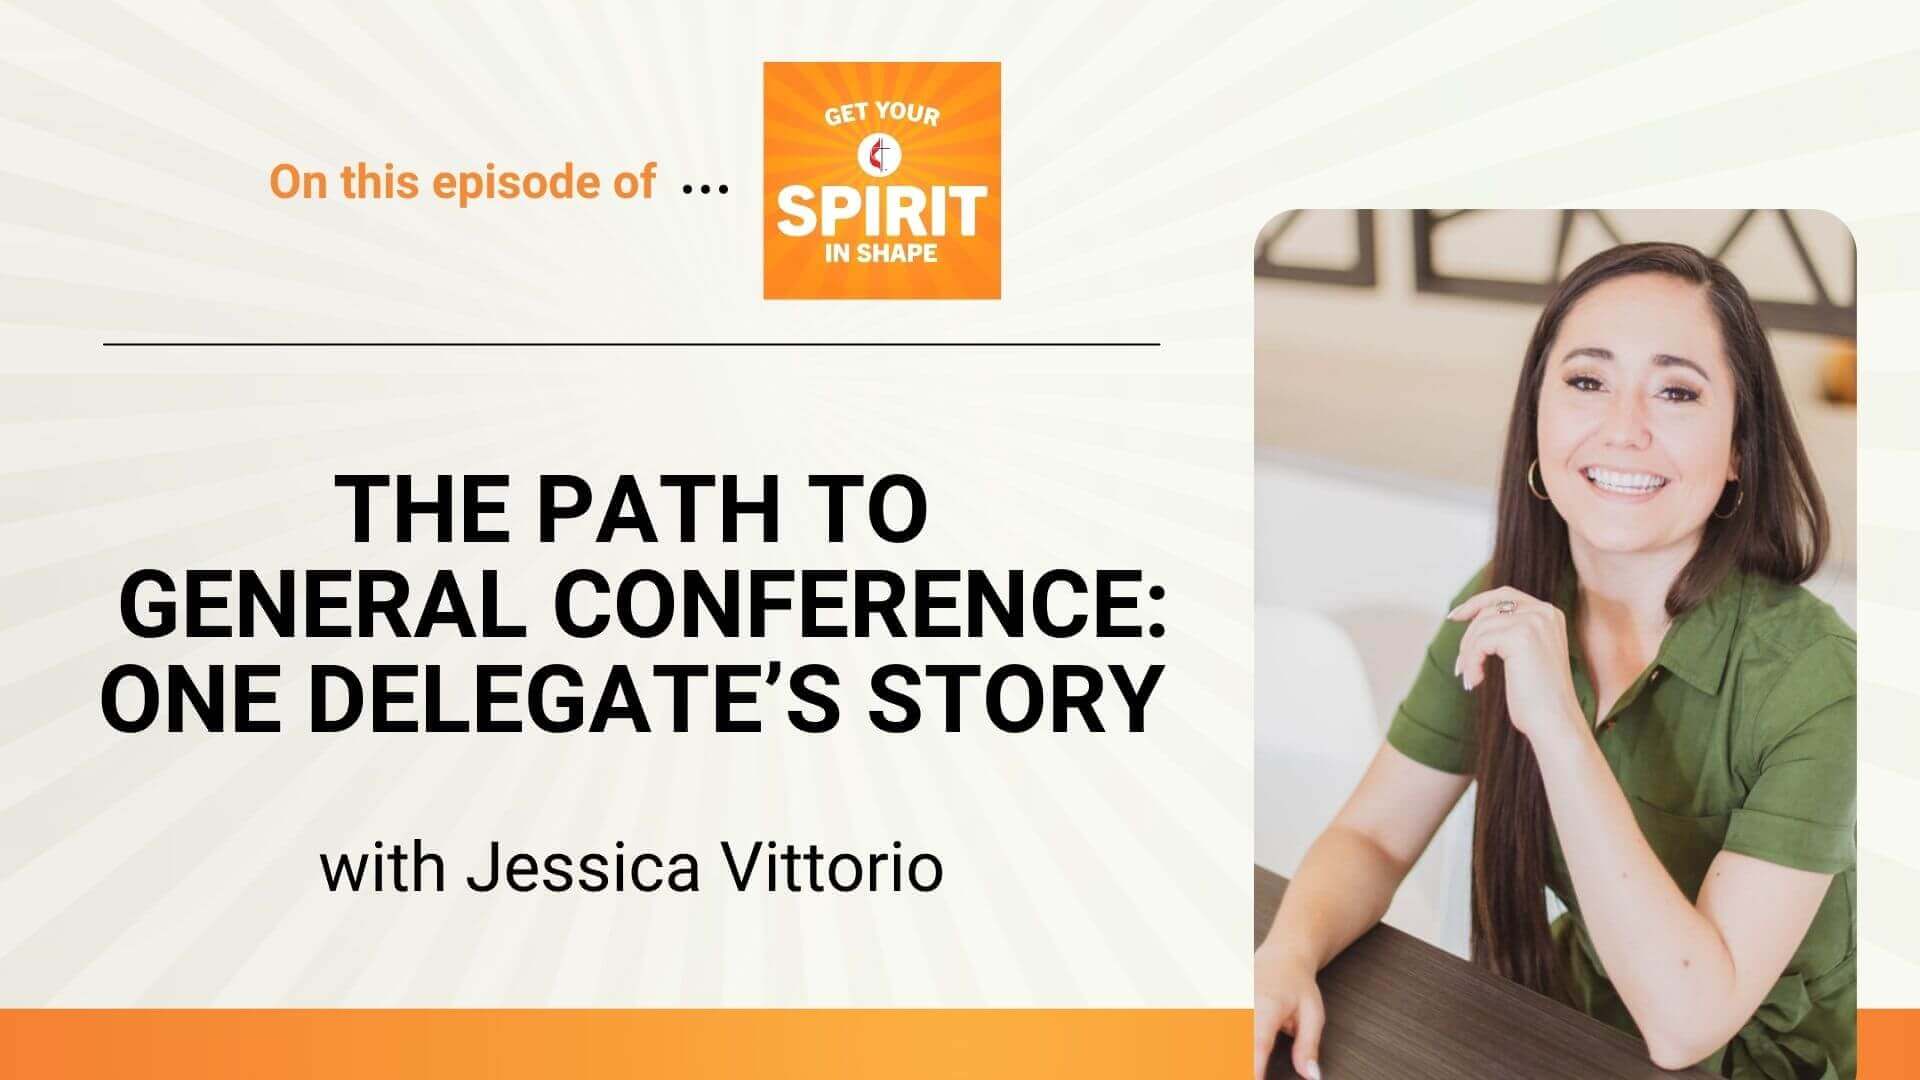 Jessica Vittorio discusses her preparations to attend the 2020 General Conference as a lay delegate from the North Texas Conference of The UMC on "Get Your Spirit in Shape." 